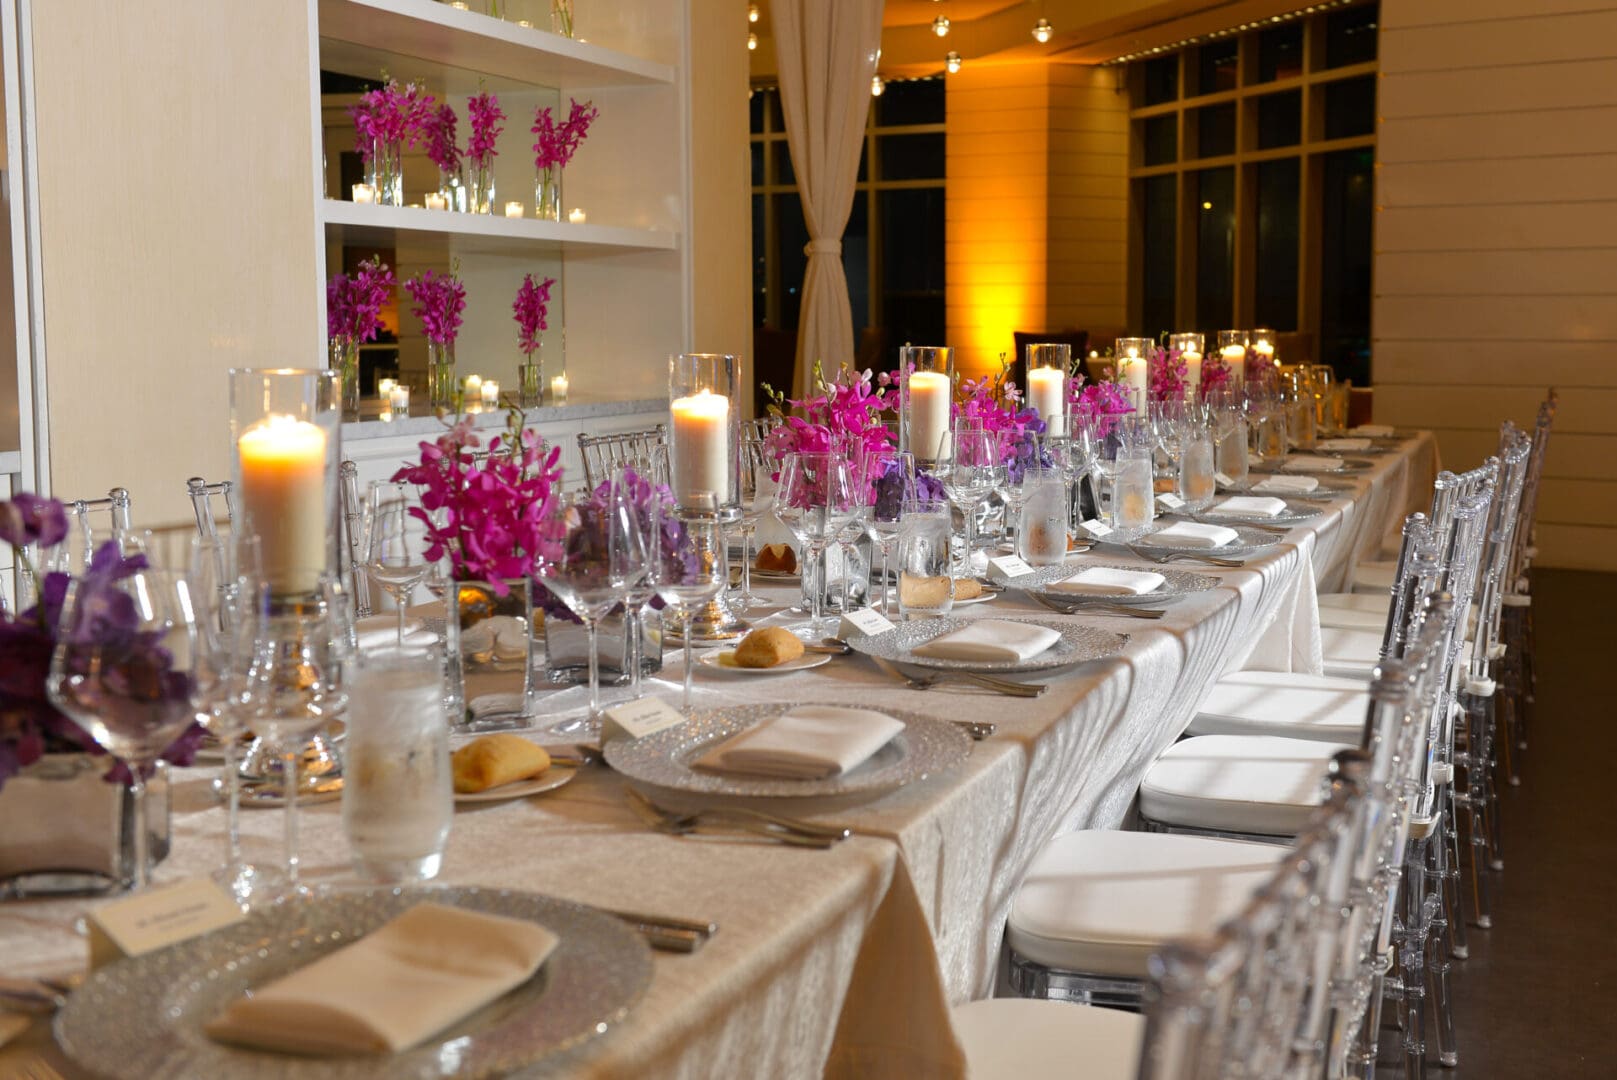 A long table with many plates and candles on it